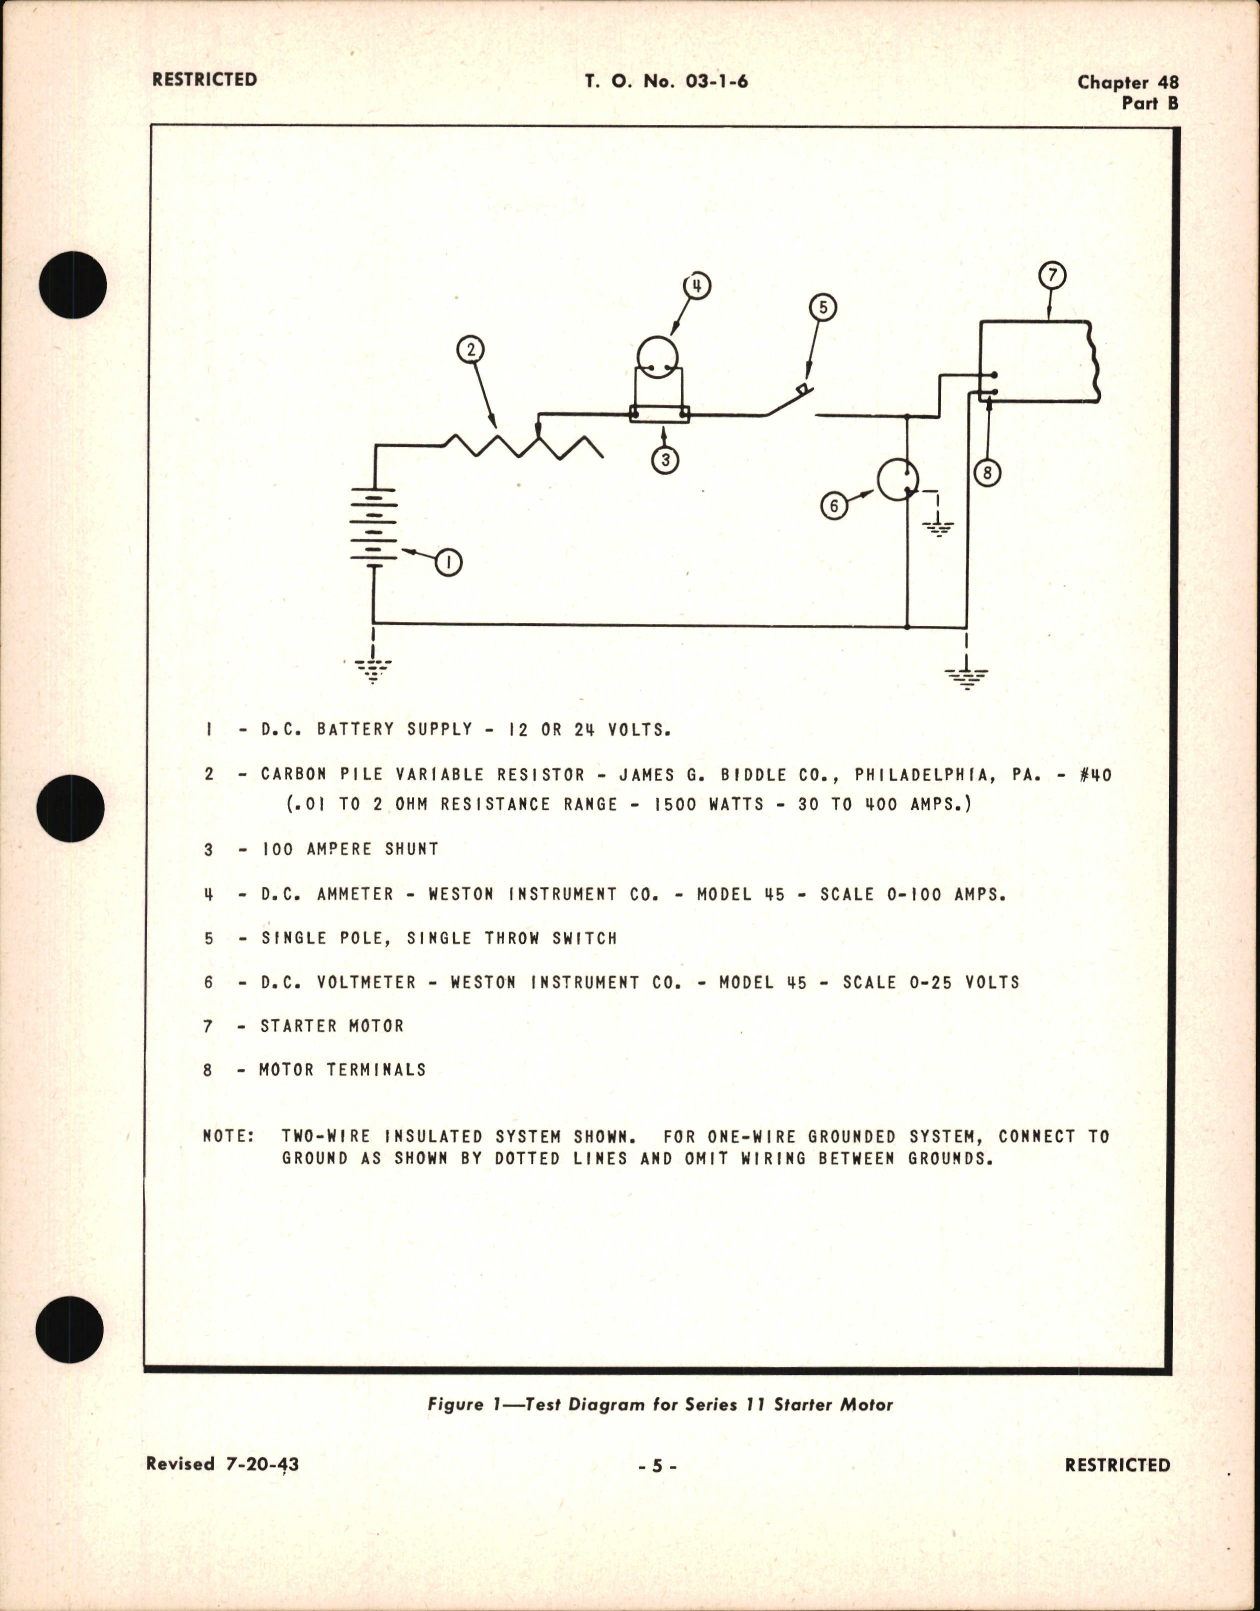 Sample page 5 from AirCorps Library document: Overhaul Instructions for Hand and Electric Inertia Starters for Series 6 and 11, Ch 48 Part B